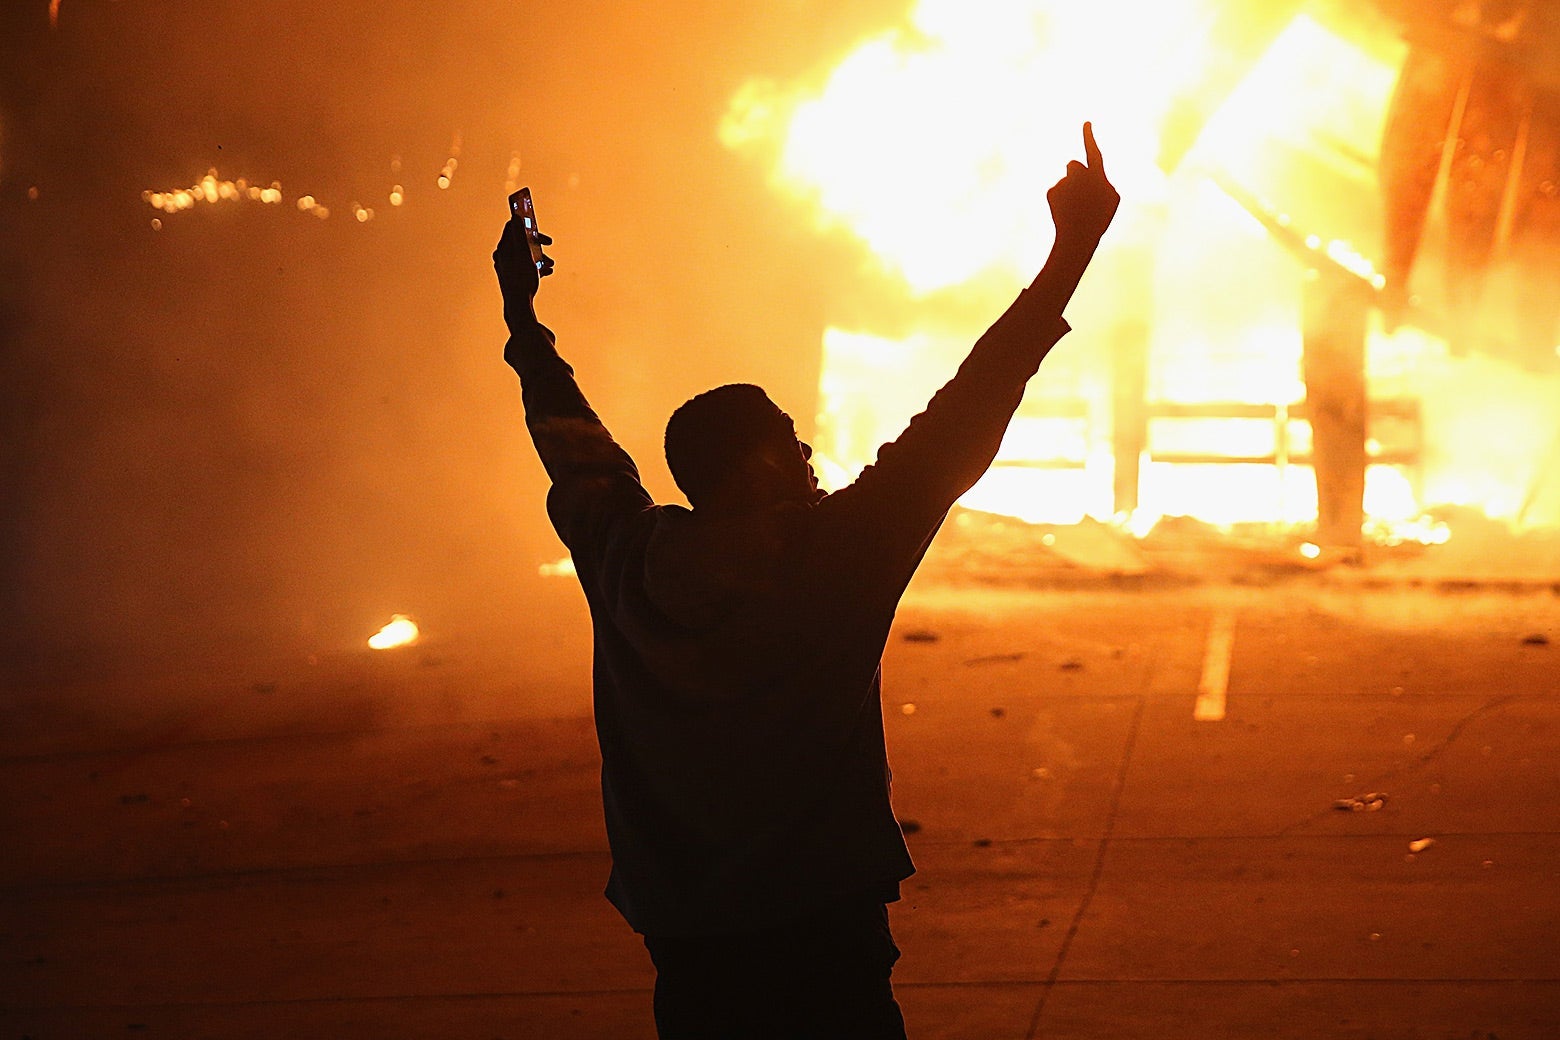 A demonstrator celebrates as a business burns during rioting following the grand jury announcement in the Michael Brown case on Nov. 24, 2014 in Ferguson, Missouri.